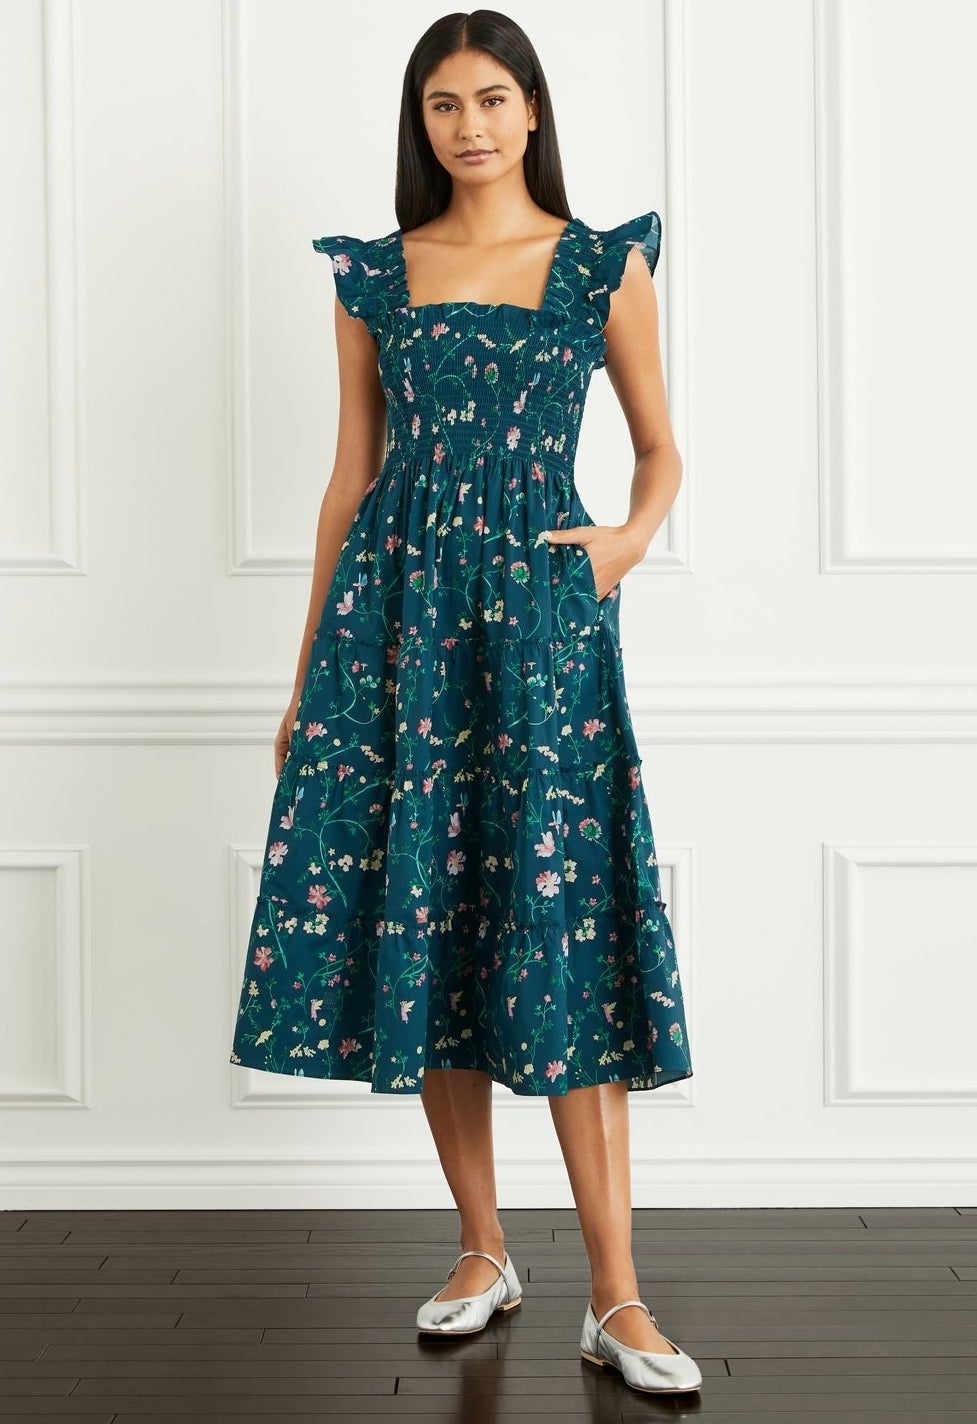 model in a teal floral pattern midi dress with a shirred top and flutter sleeves